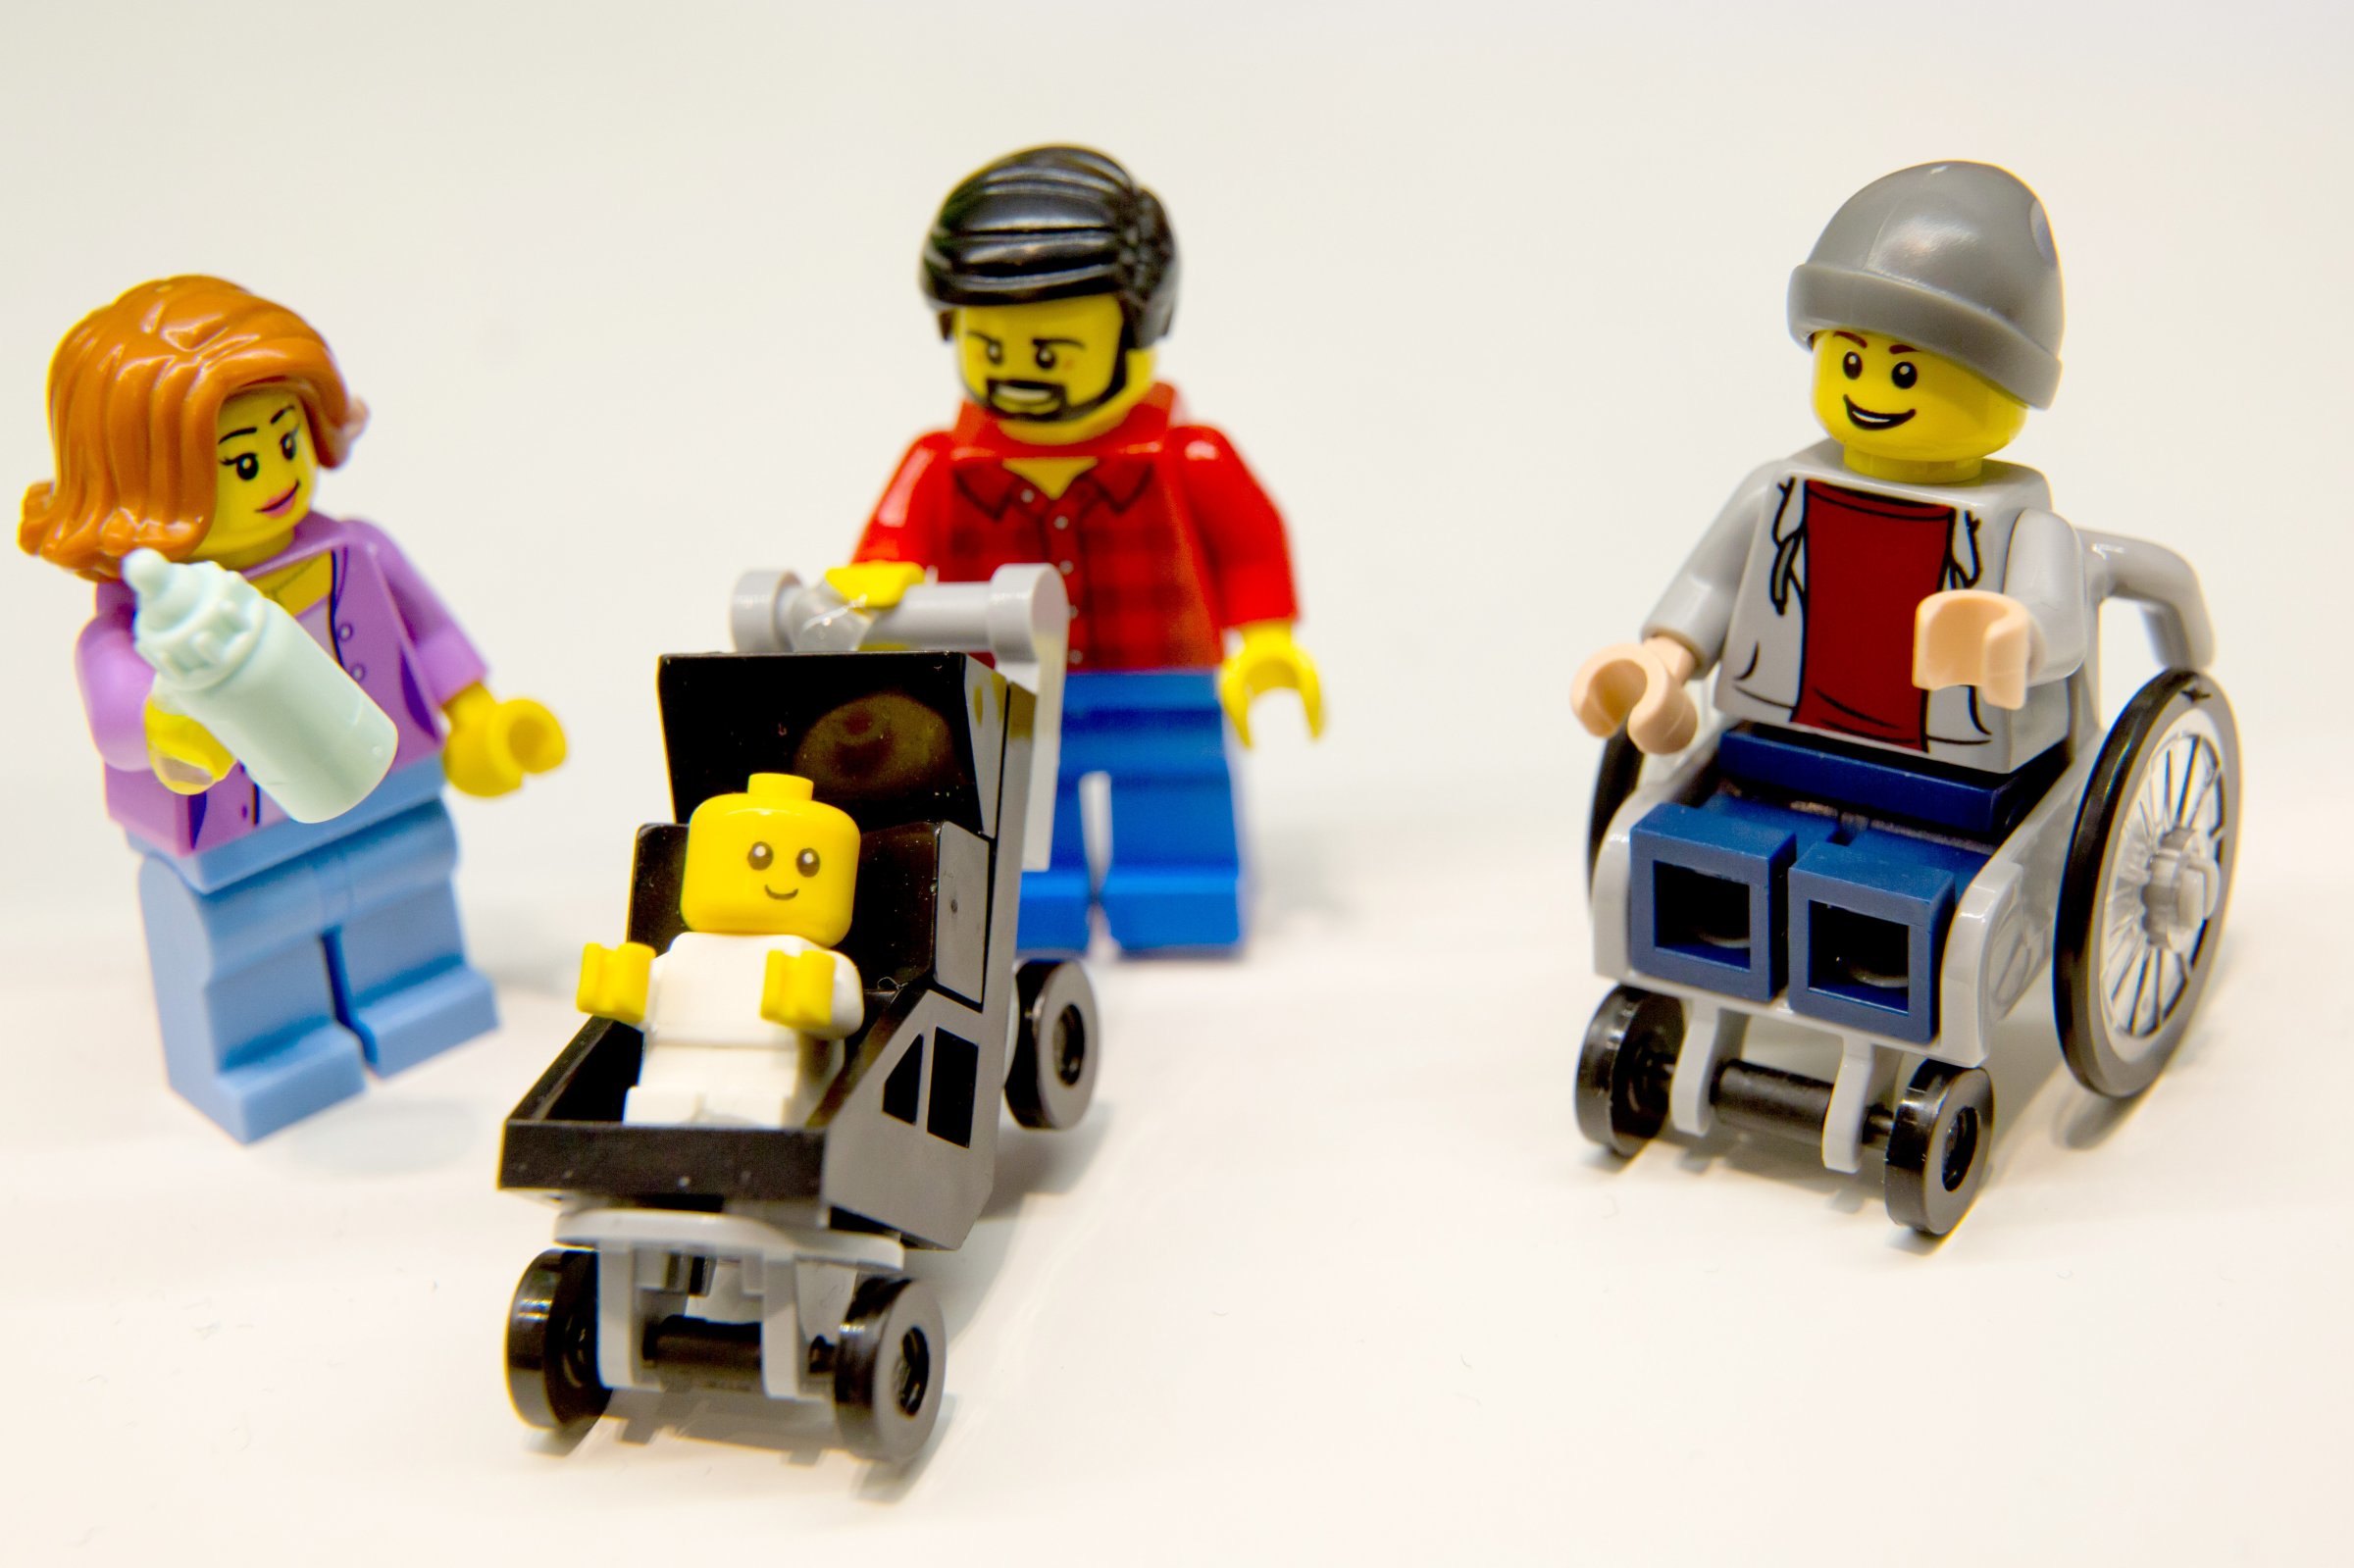 Lego figurines, including one in a wheelchair are pictured at the Lego booth on January 28, 2016 in Nuernberg during the 67th International Toy Fair.